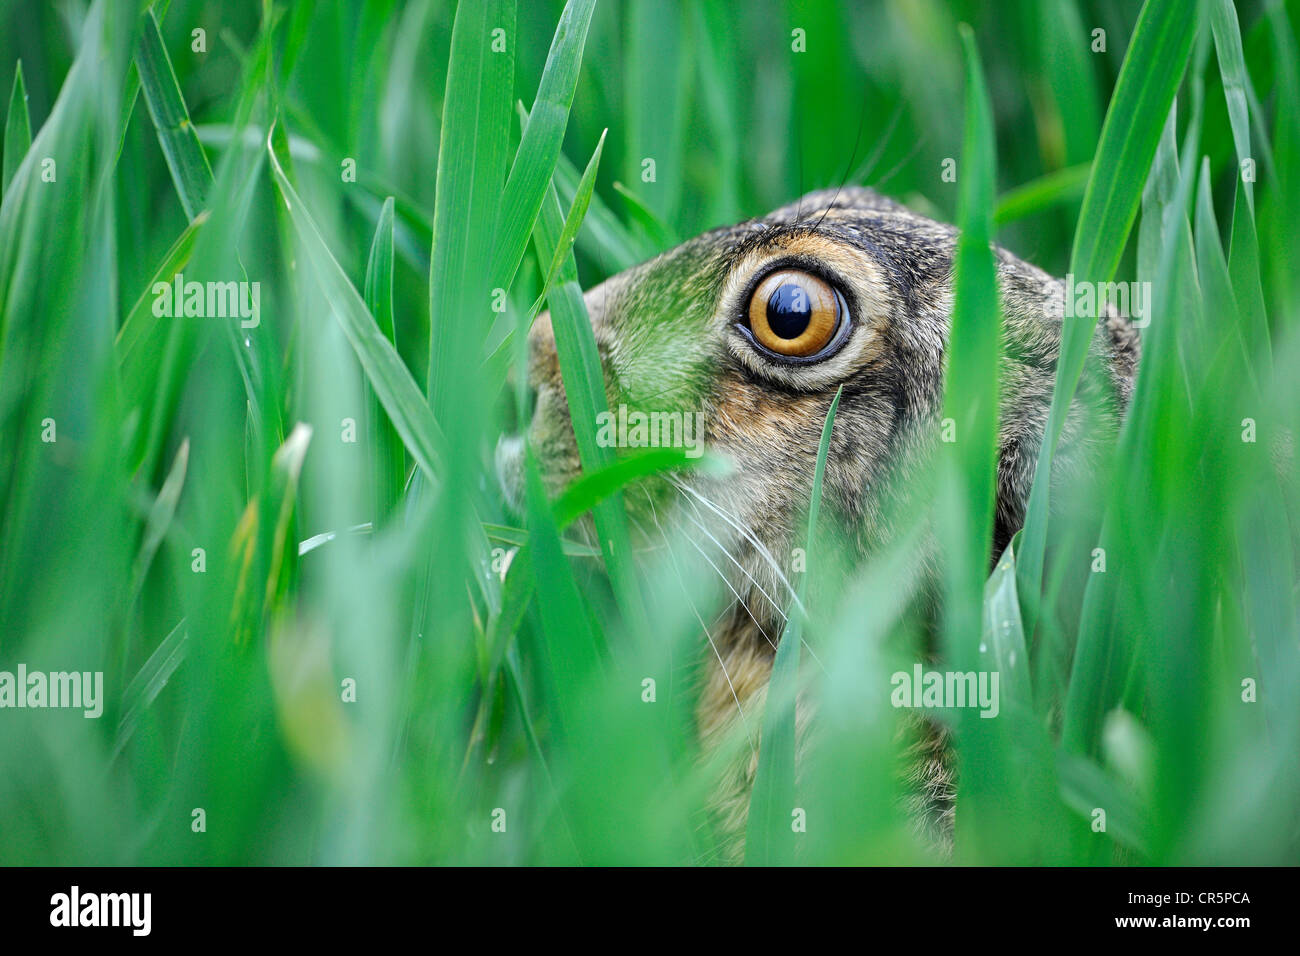 Hare (Lepus europaeus) in the grass, Thuringia, Germany, Europe Stock Photo